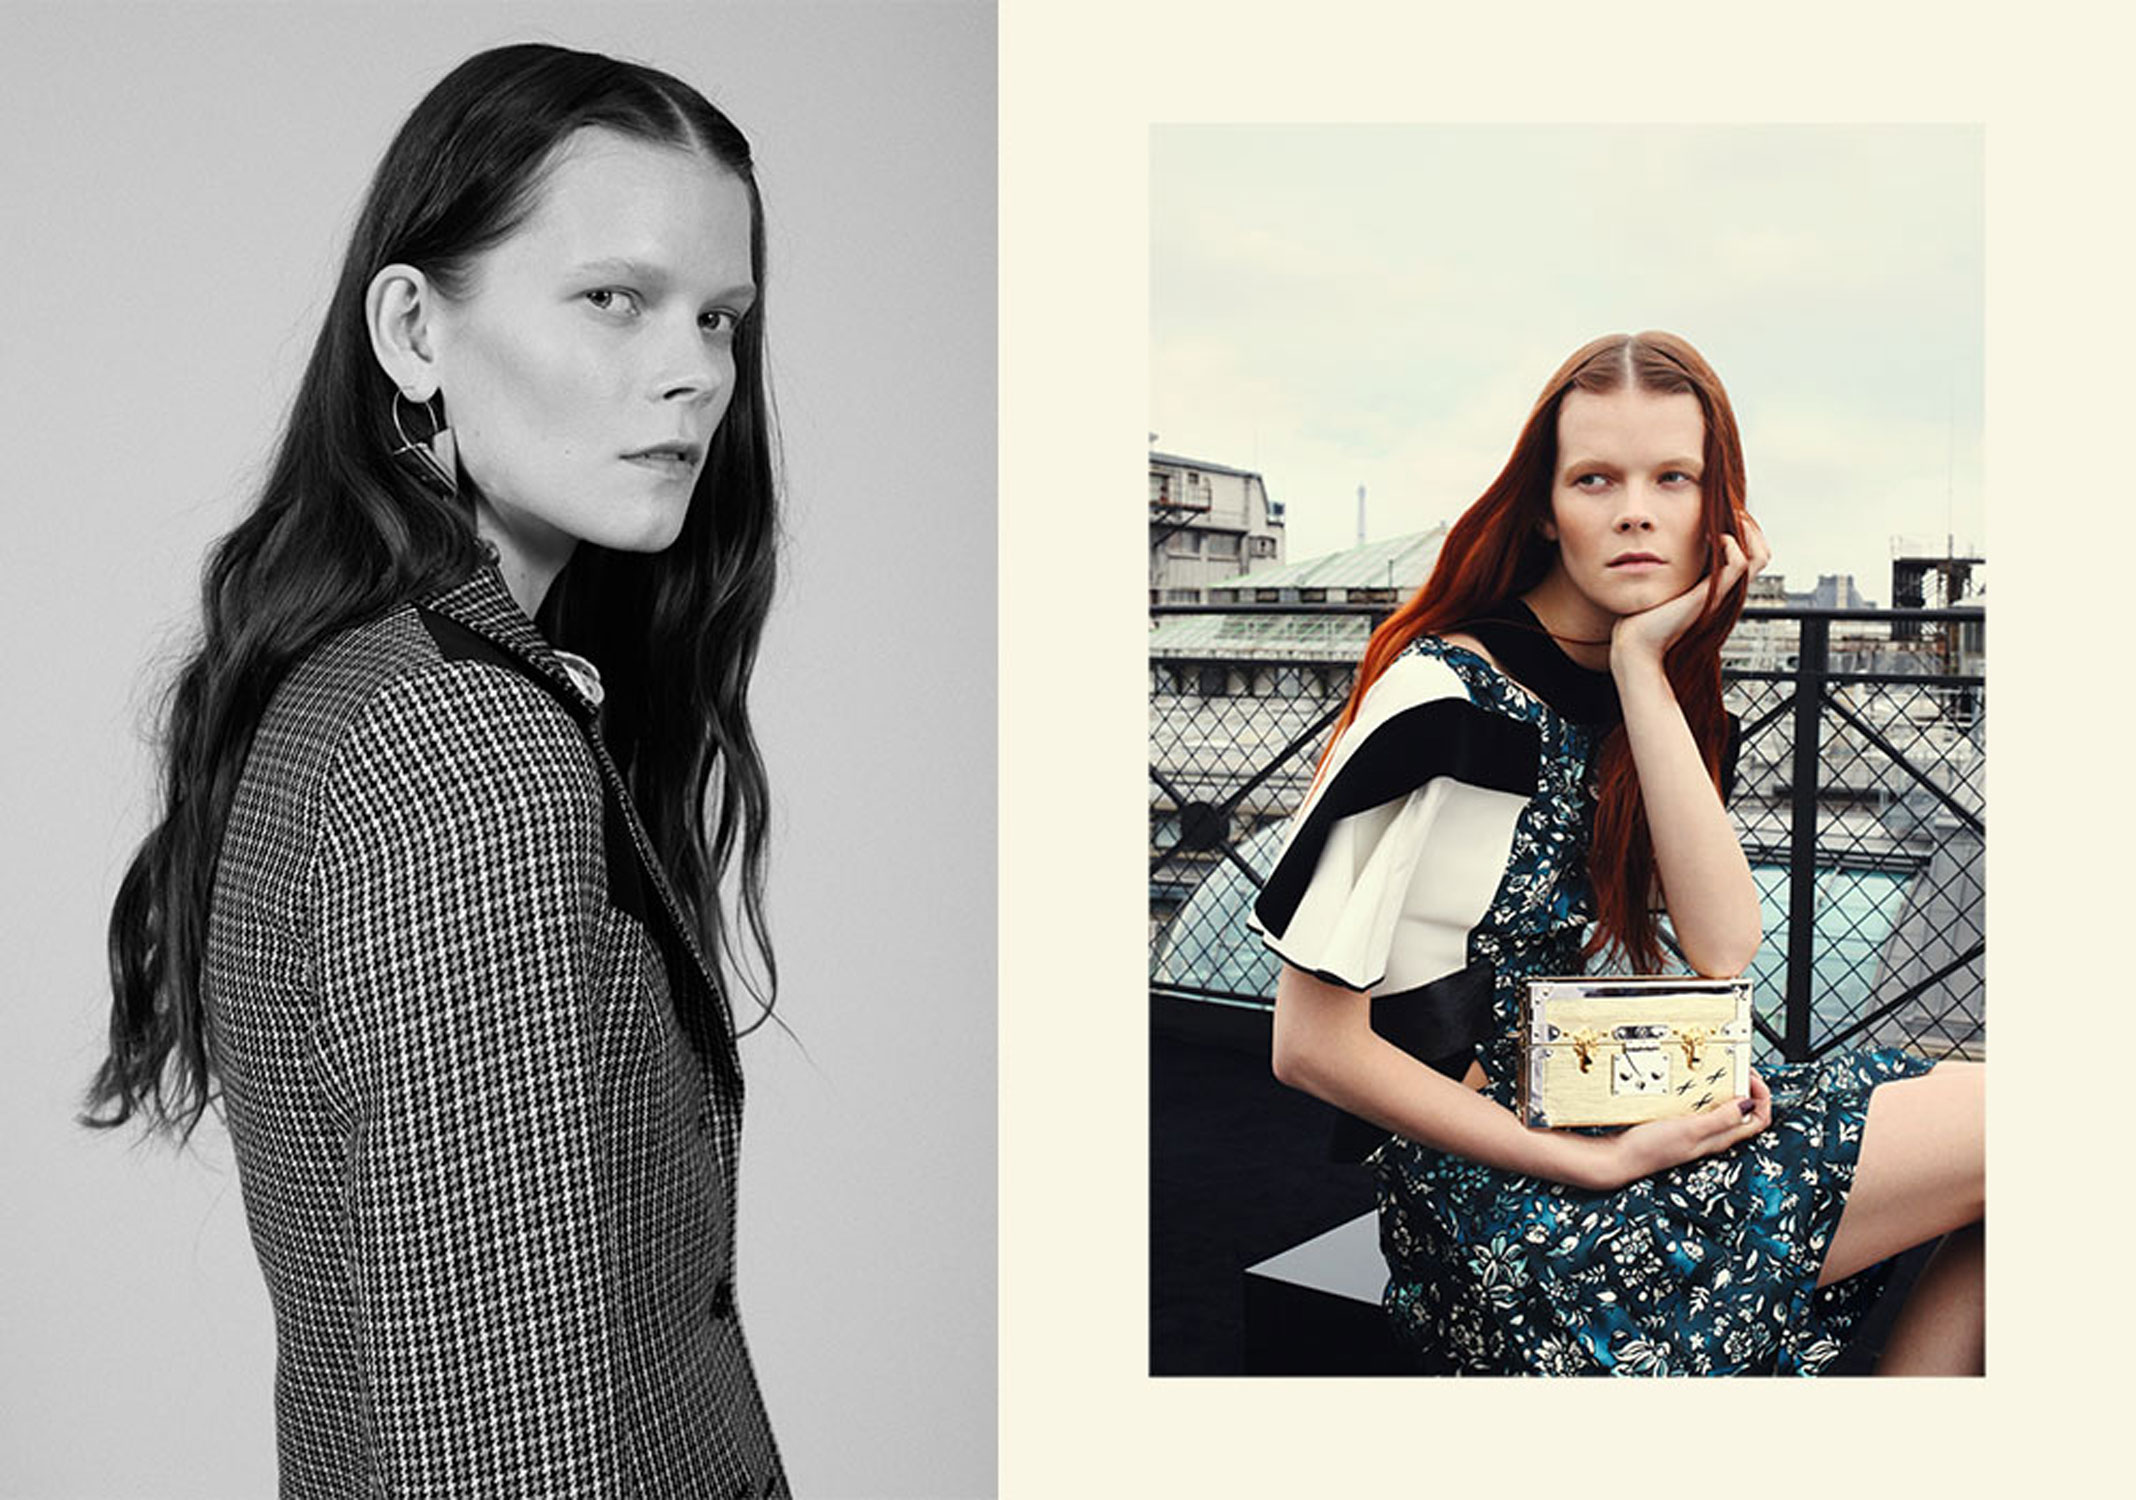 Telegraph Fashion Story in Stella styled by Charlie Harrington. Spread 5.